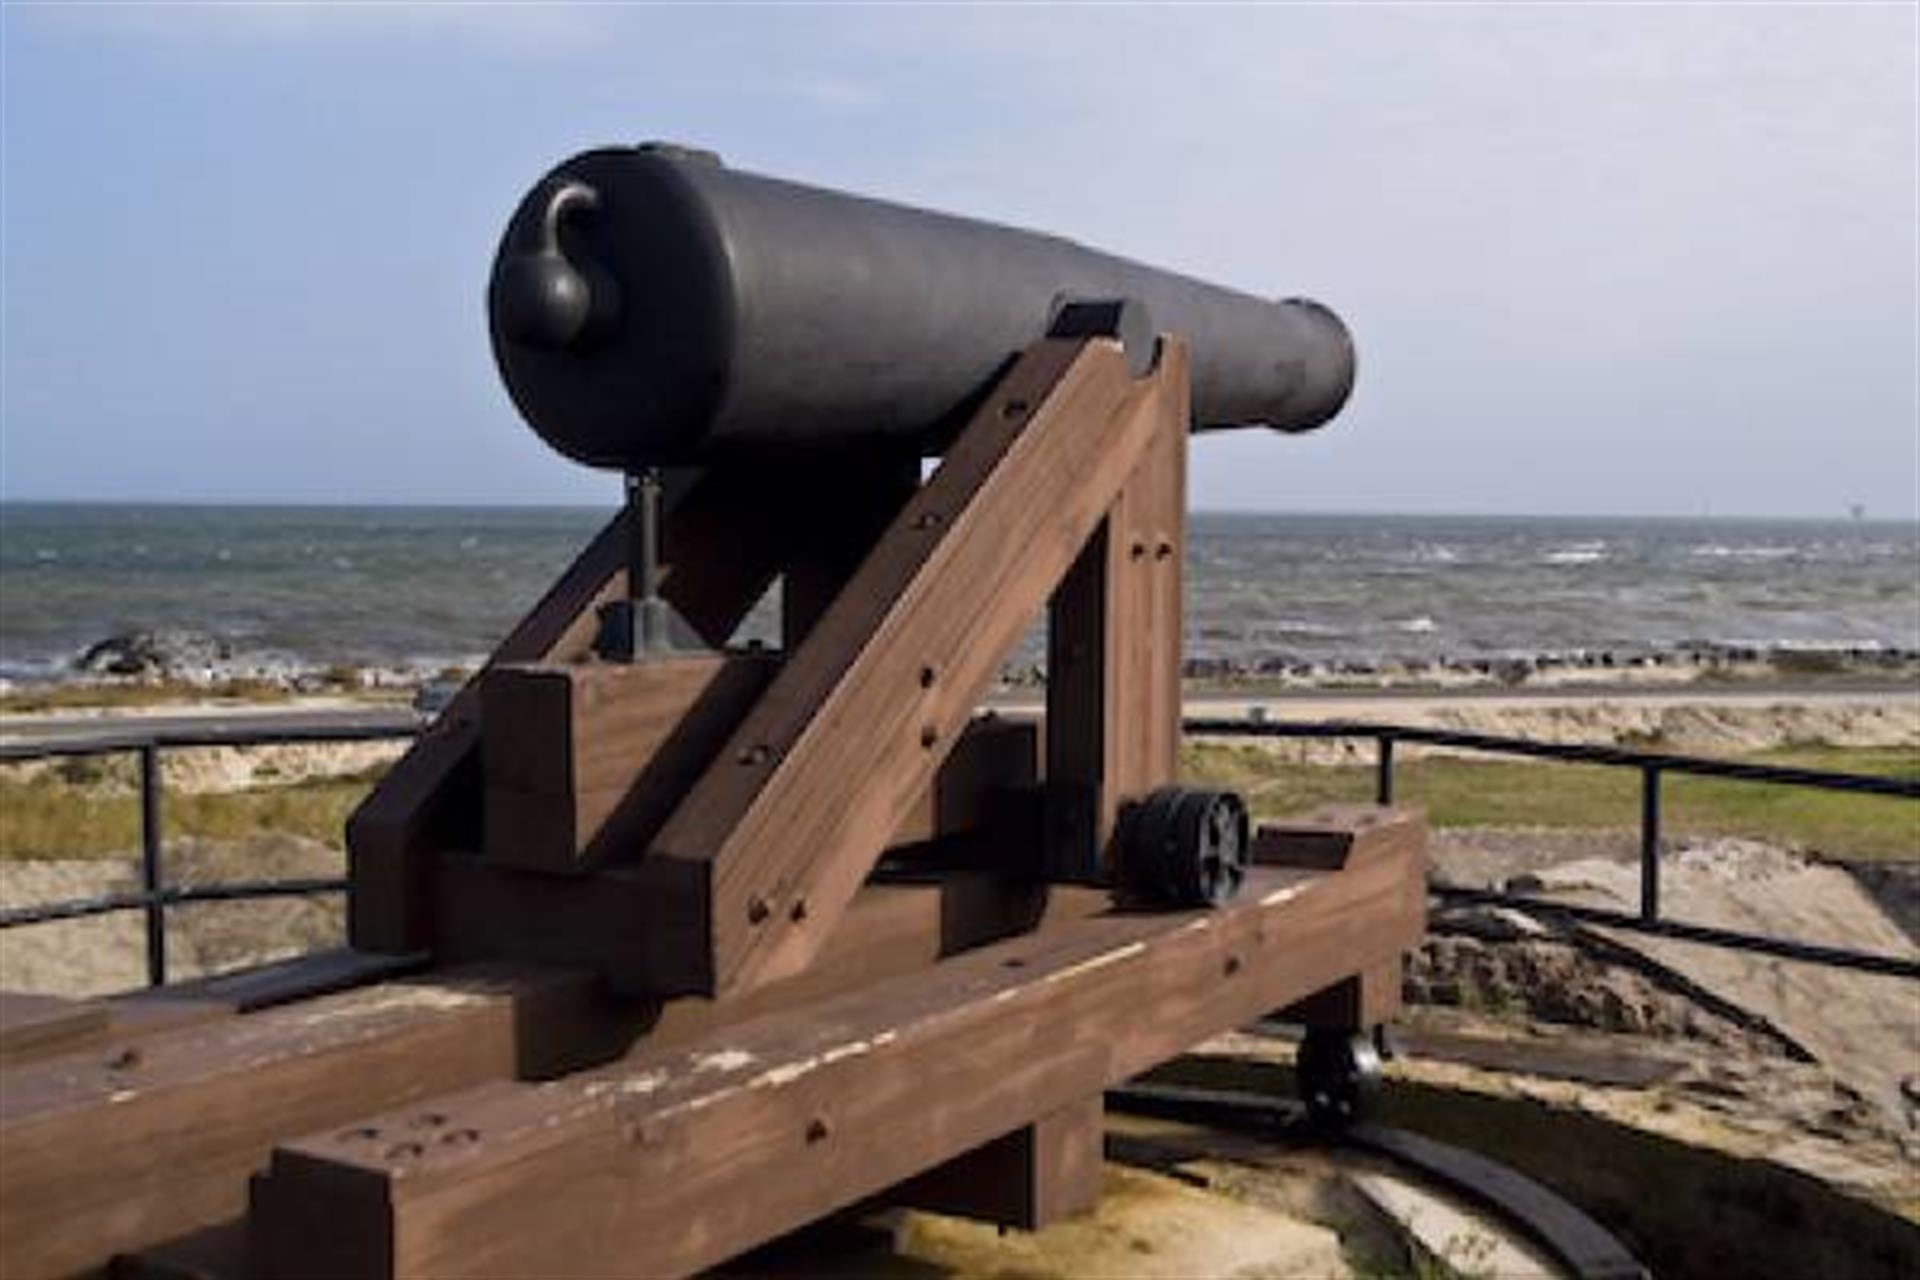 fort gaines